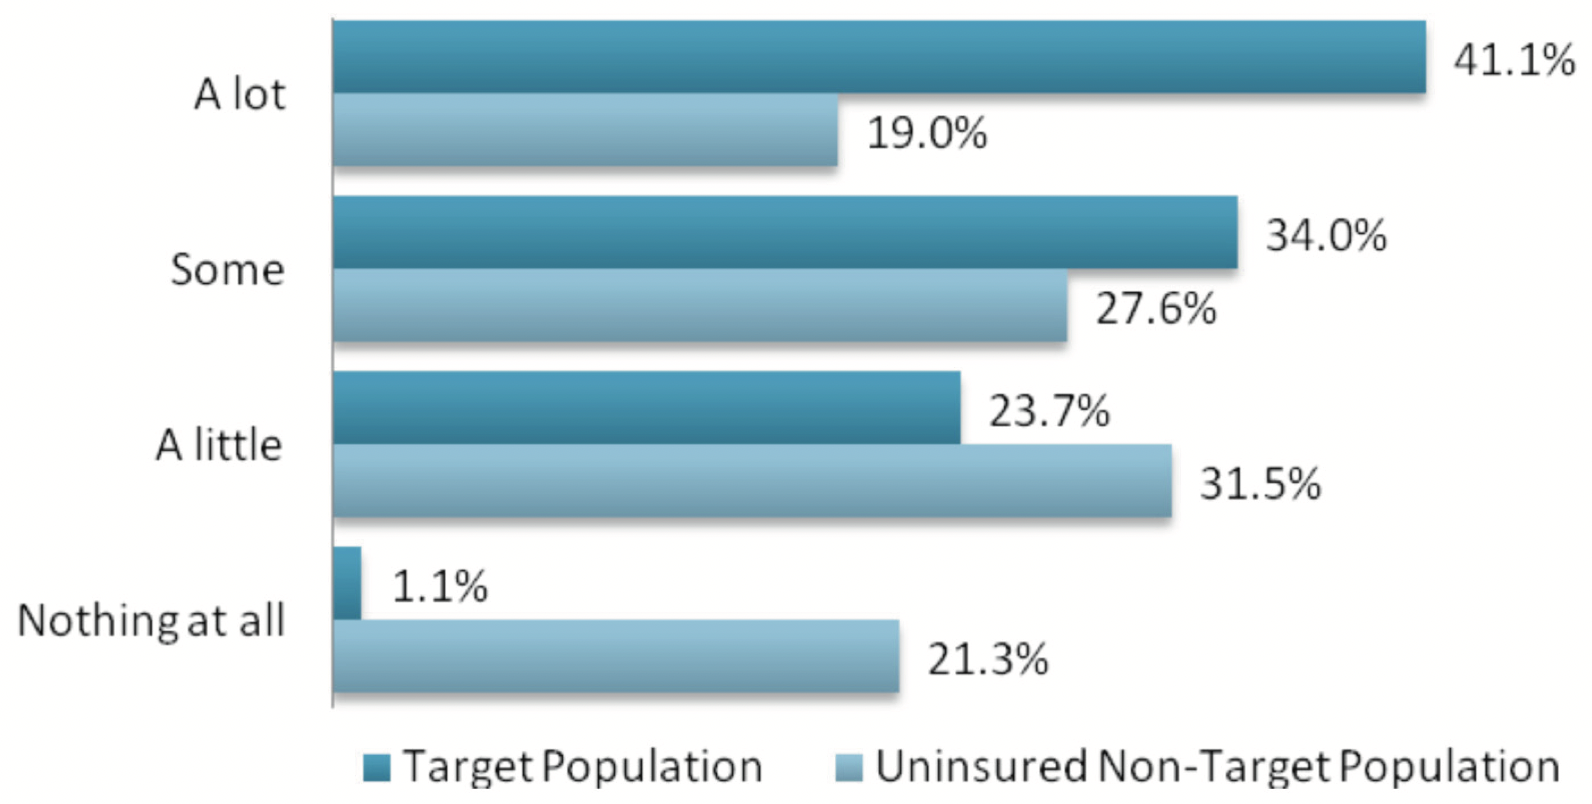 This graph compares knowledge of the Marketplace between the target population and the non-target population.